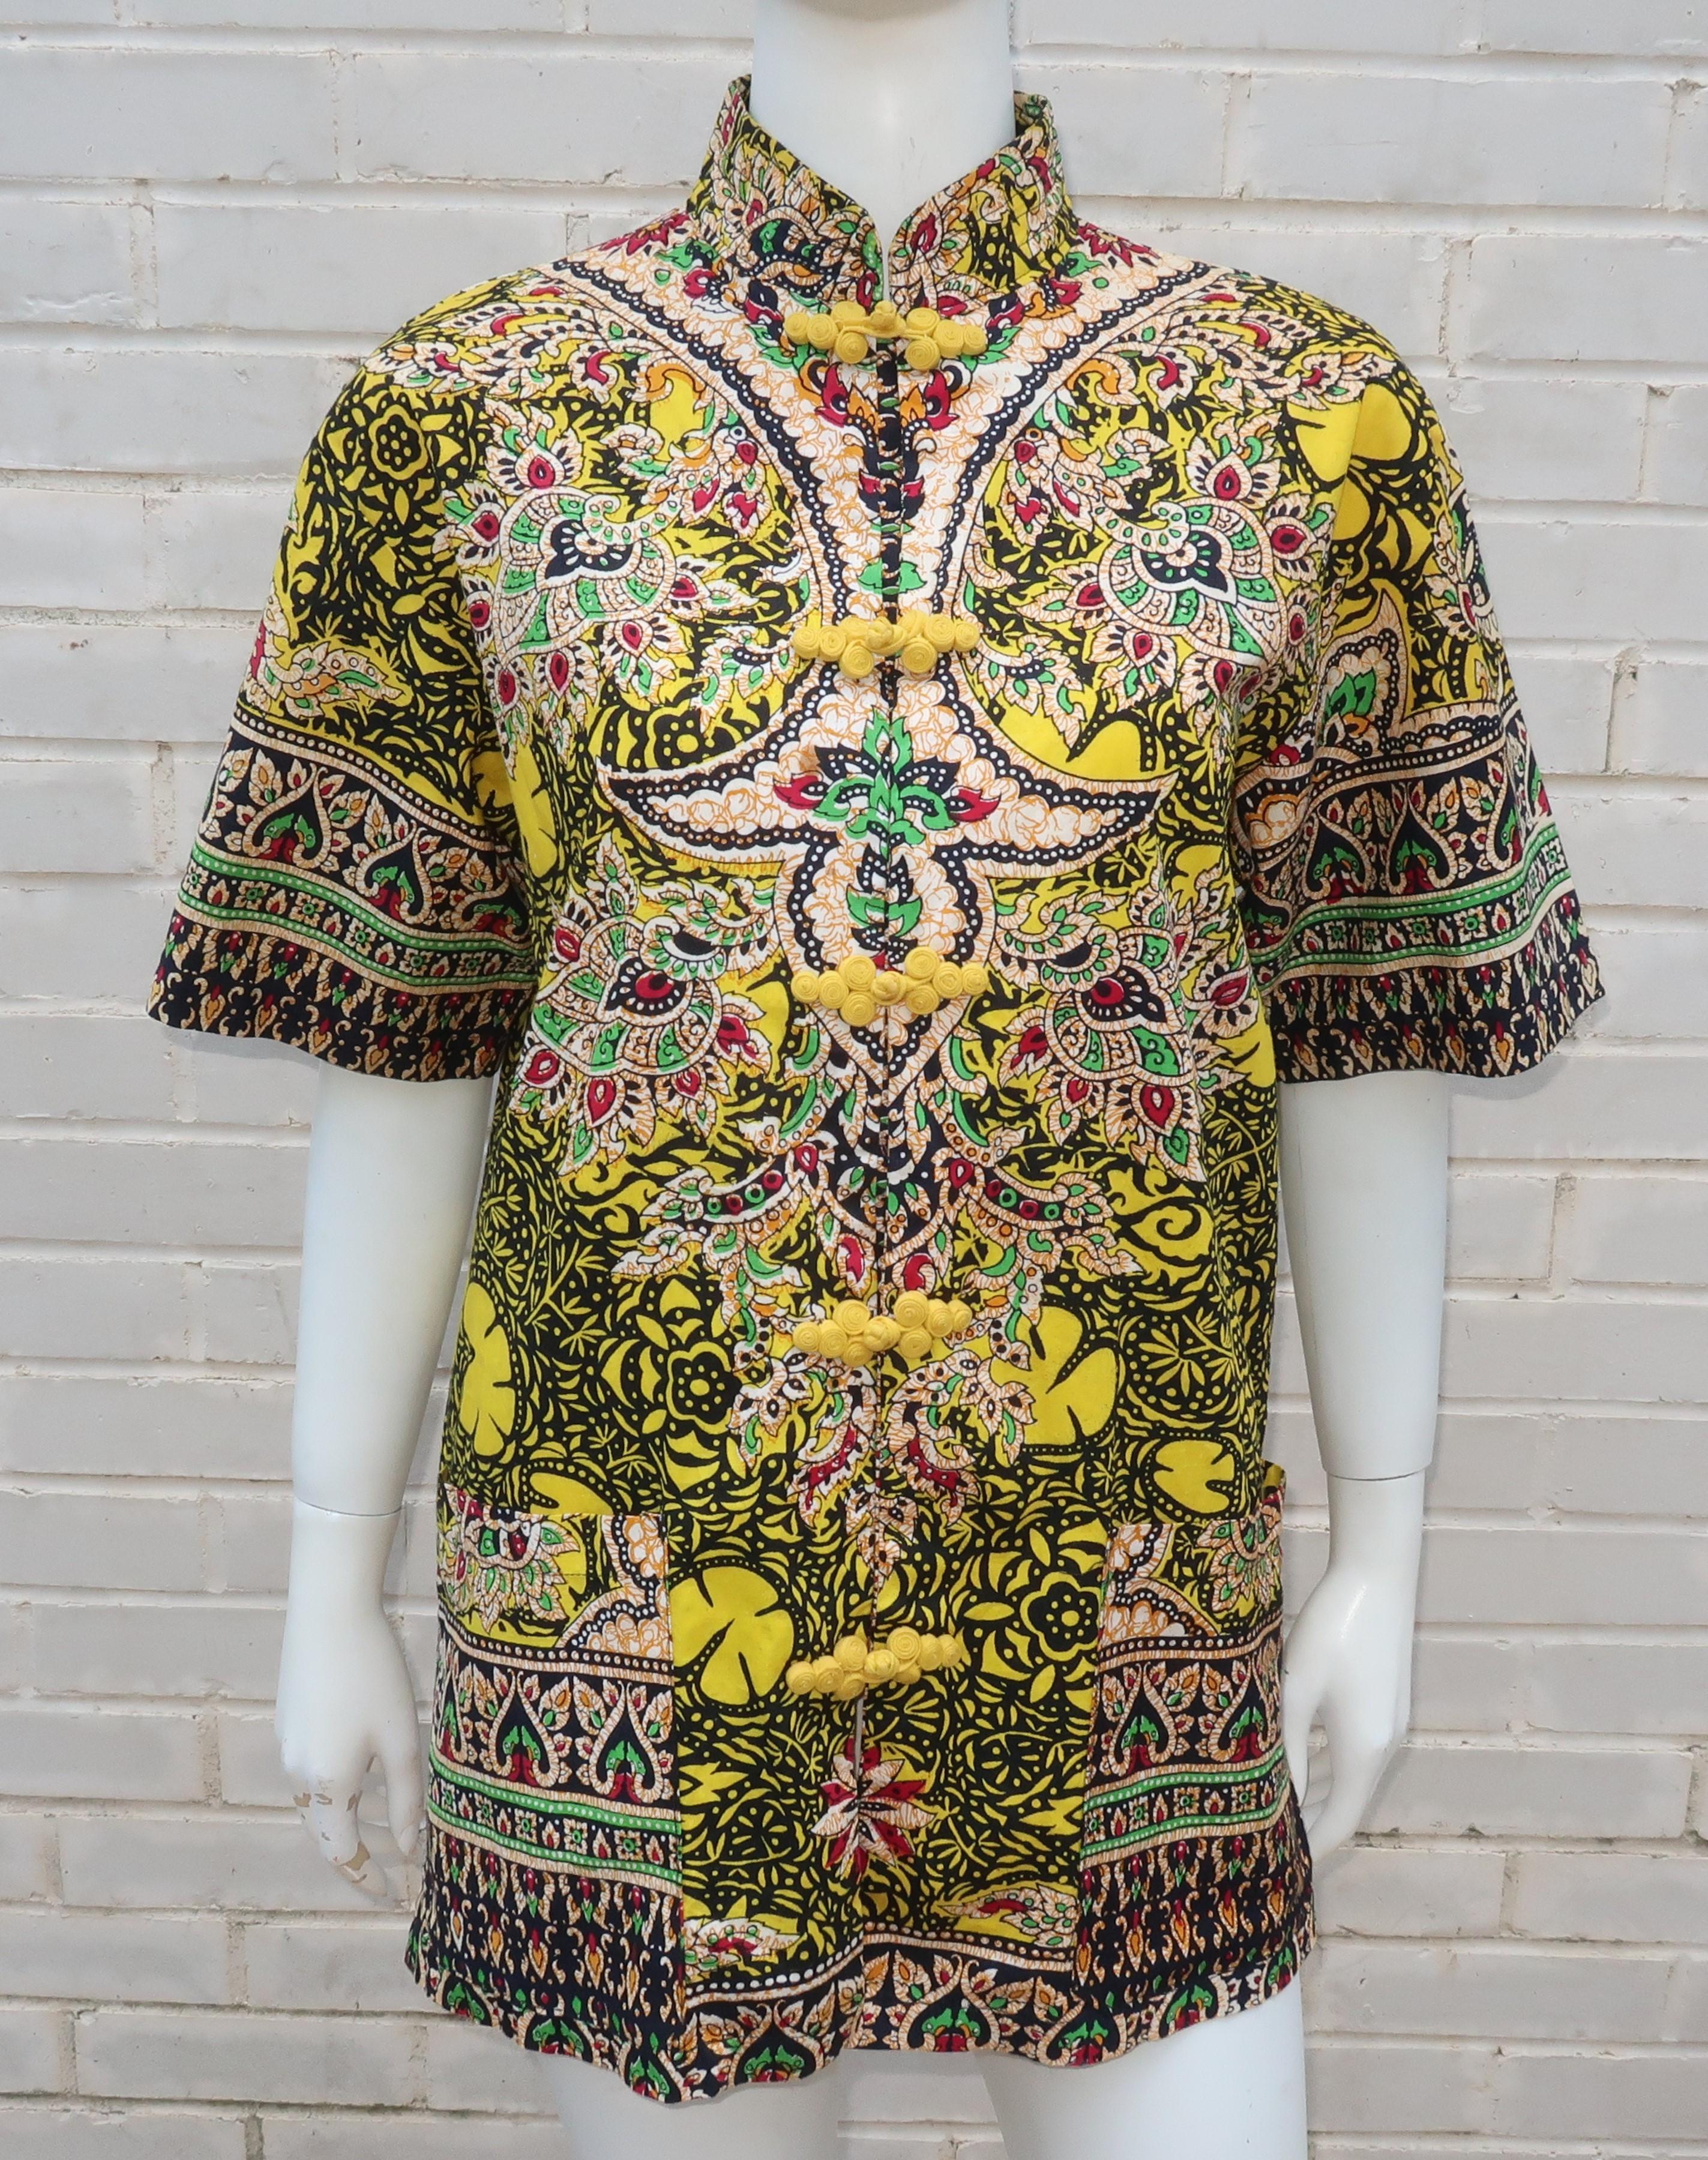 A Mandarin style top made in Thailand from a colorful cotton fabric with a traditional Thai print incorporating shades of bright yellow, green, red, orange, white and black.  The short sleeved silhouette has the details of a jacket with side vents